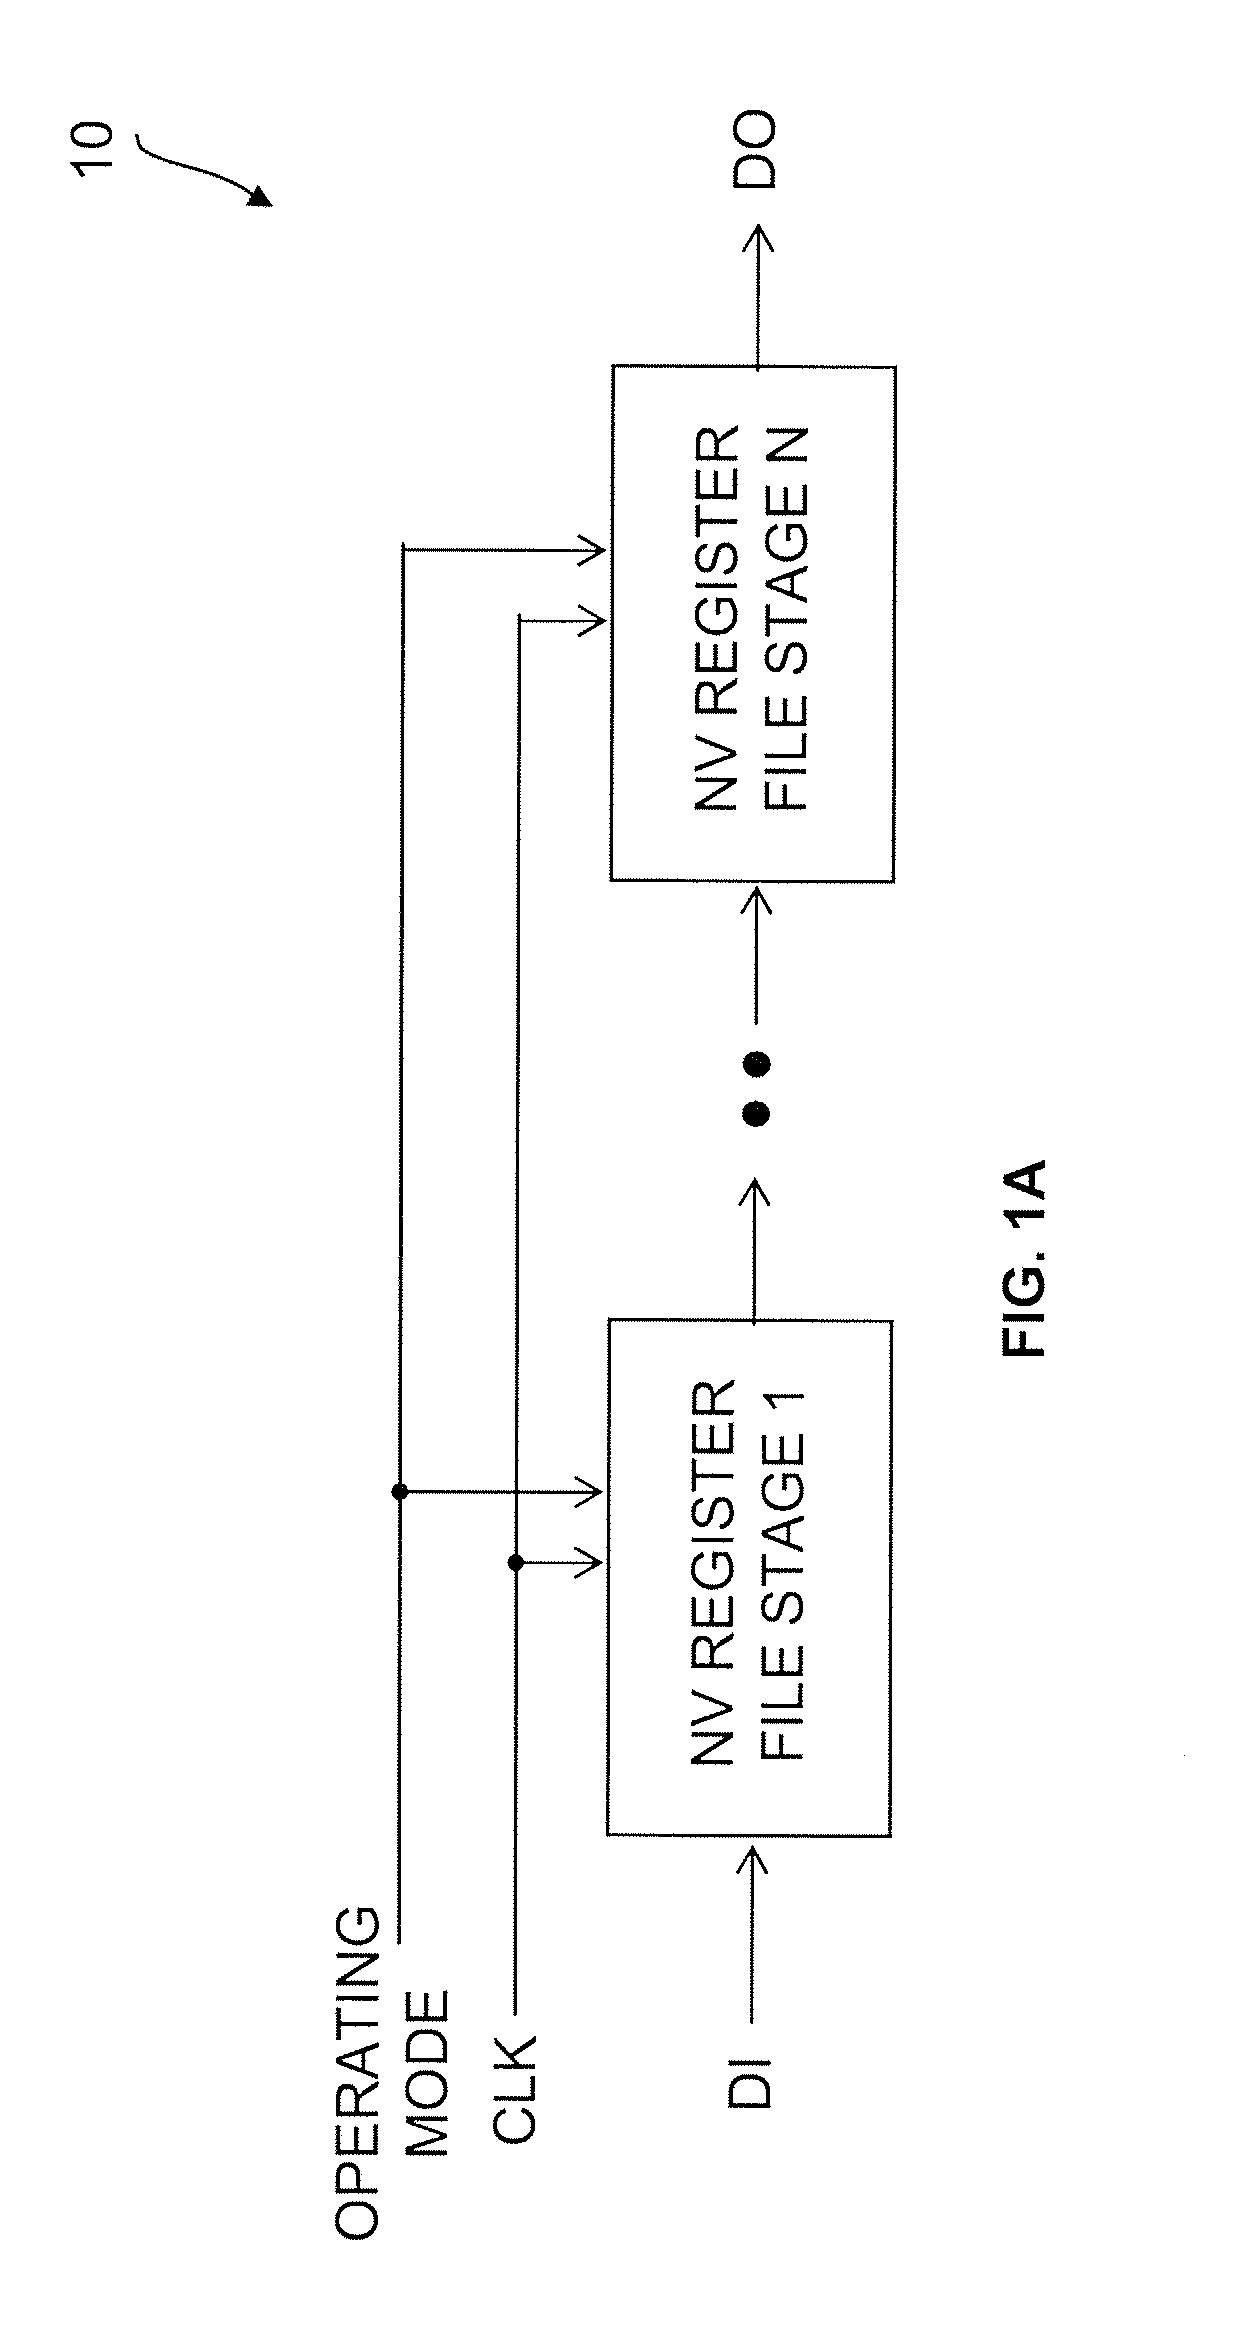 Latch circuits and operation circuits having scalable nonvolatile nanotube switches as electronic fuse replacement elements